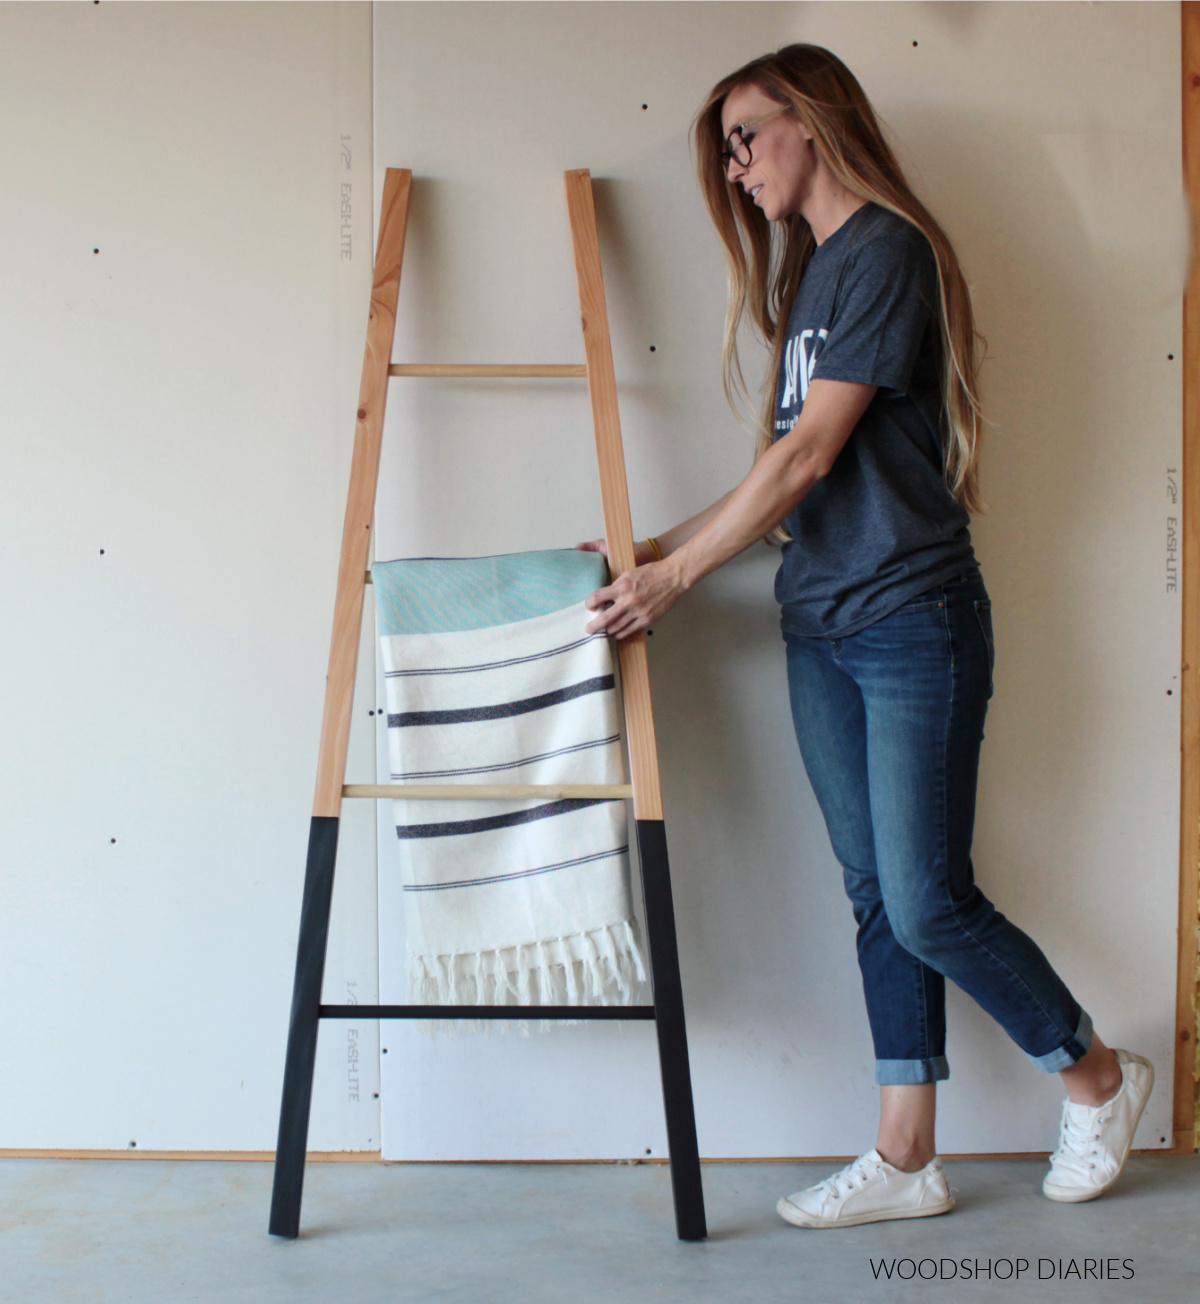 How to Make a Rustic Ladder to Hang Towels/Blankets